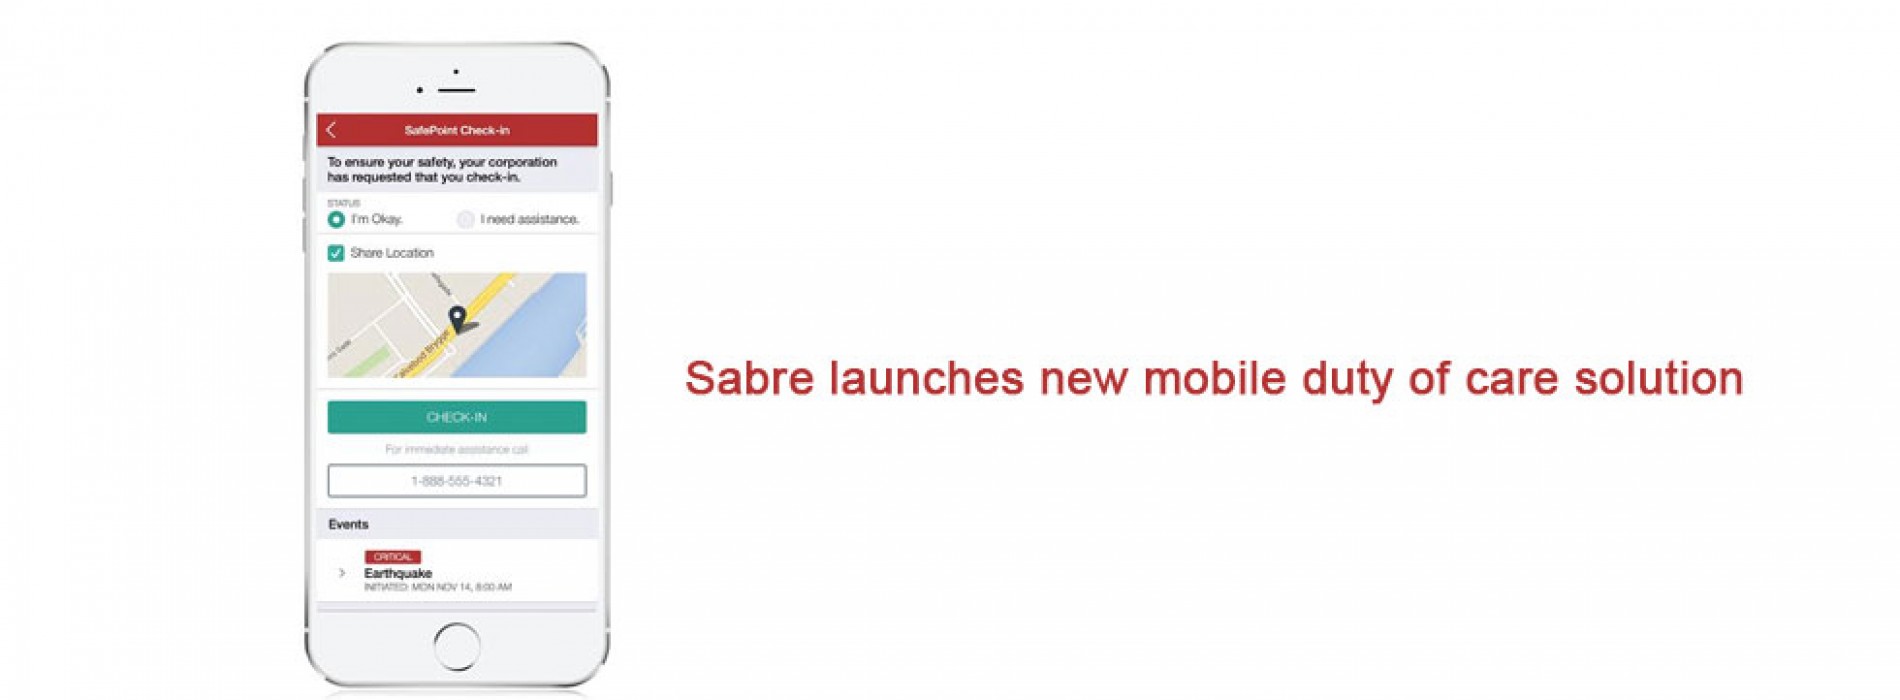 Sabre introduces SafePoint, a smarter, faster and more accurate way to help protect travelers